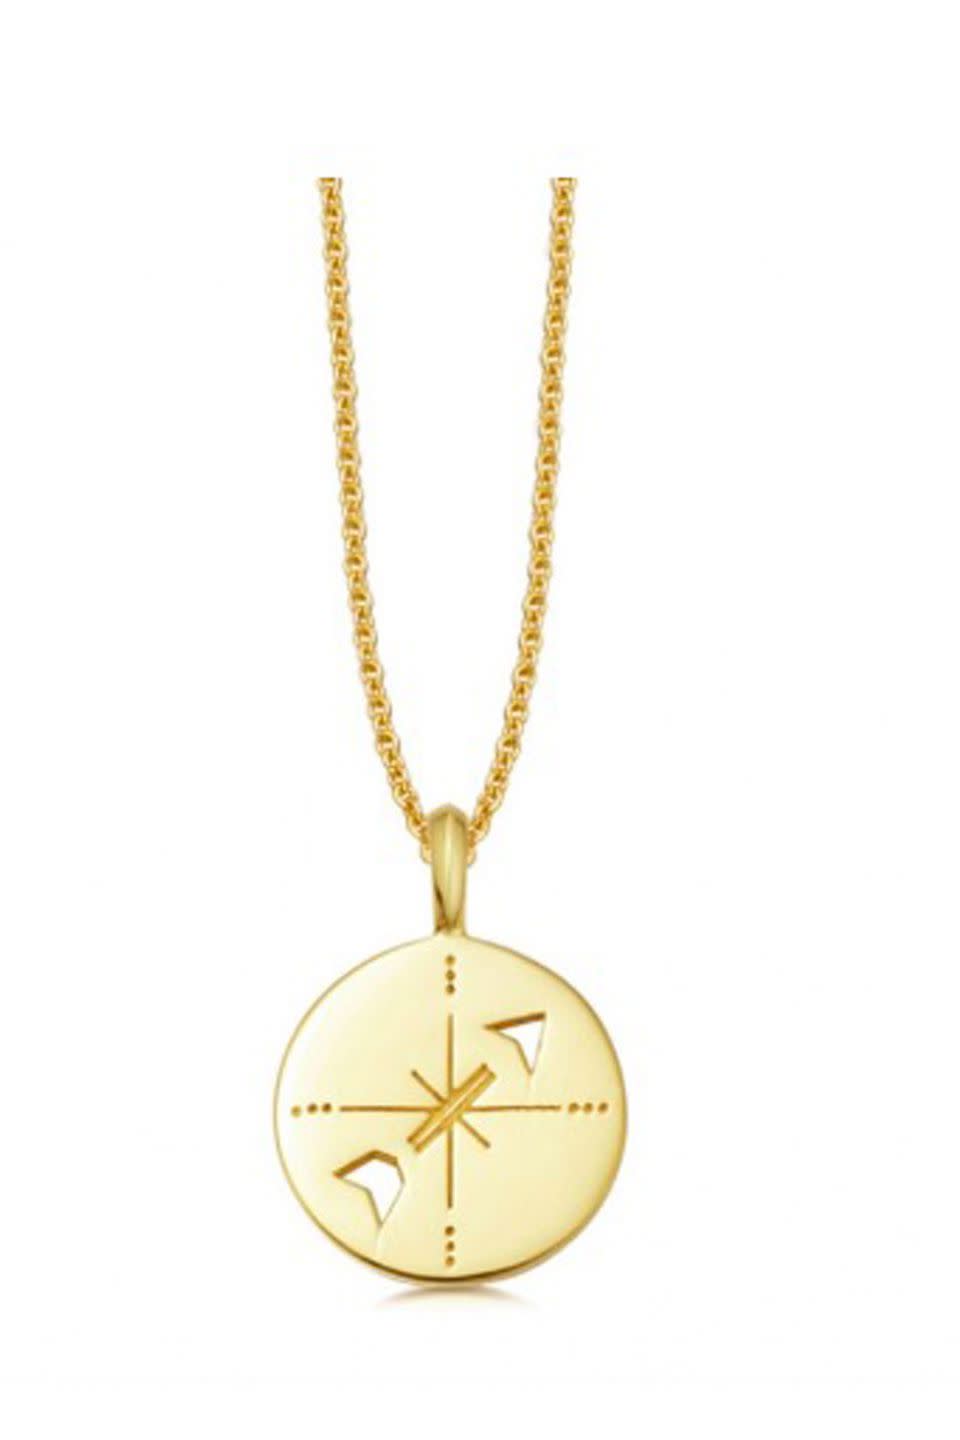 Travel gifts - Compass Amulet Necklace